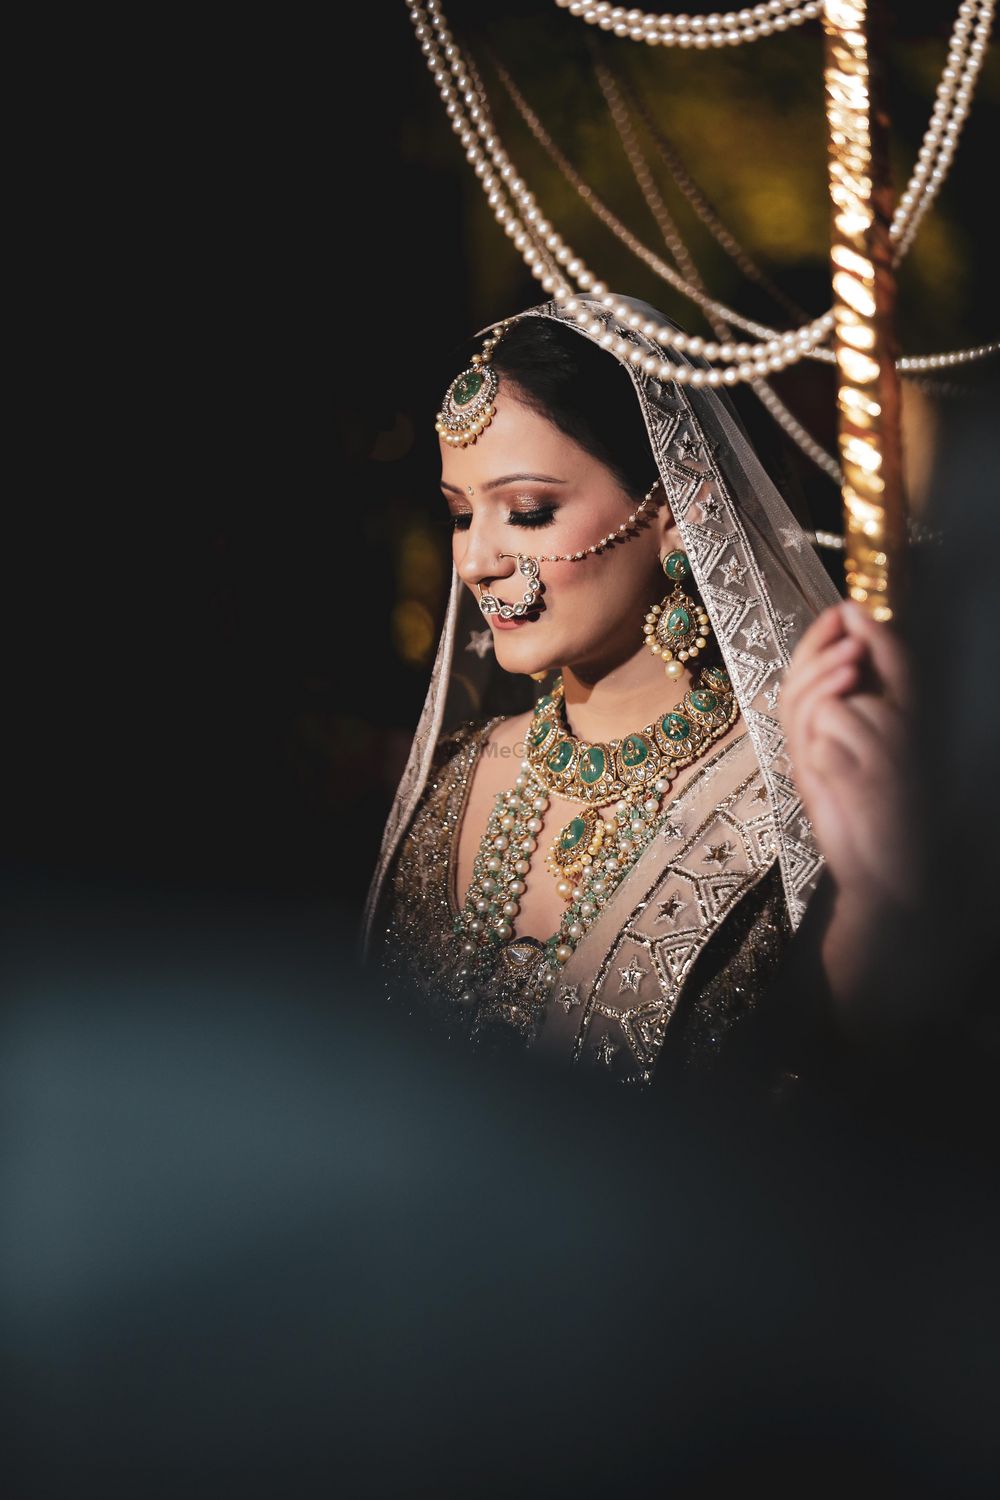 Photo of Pretty bridal portrait during her entry